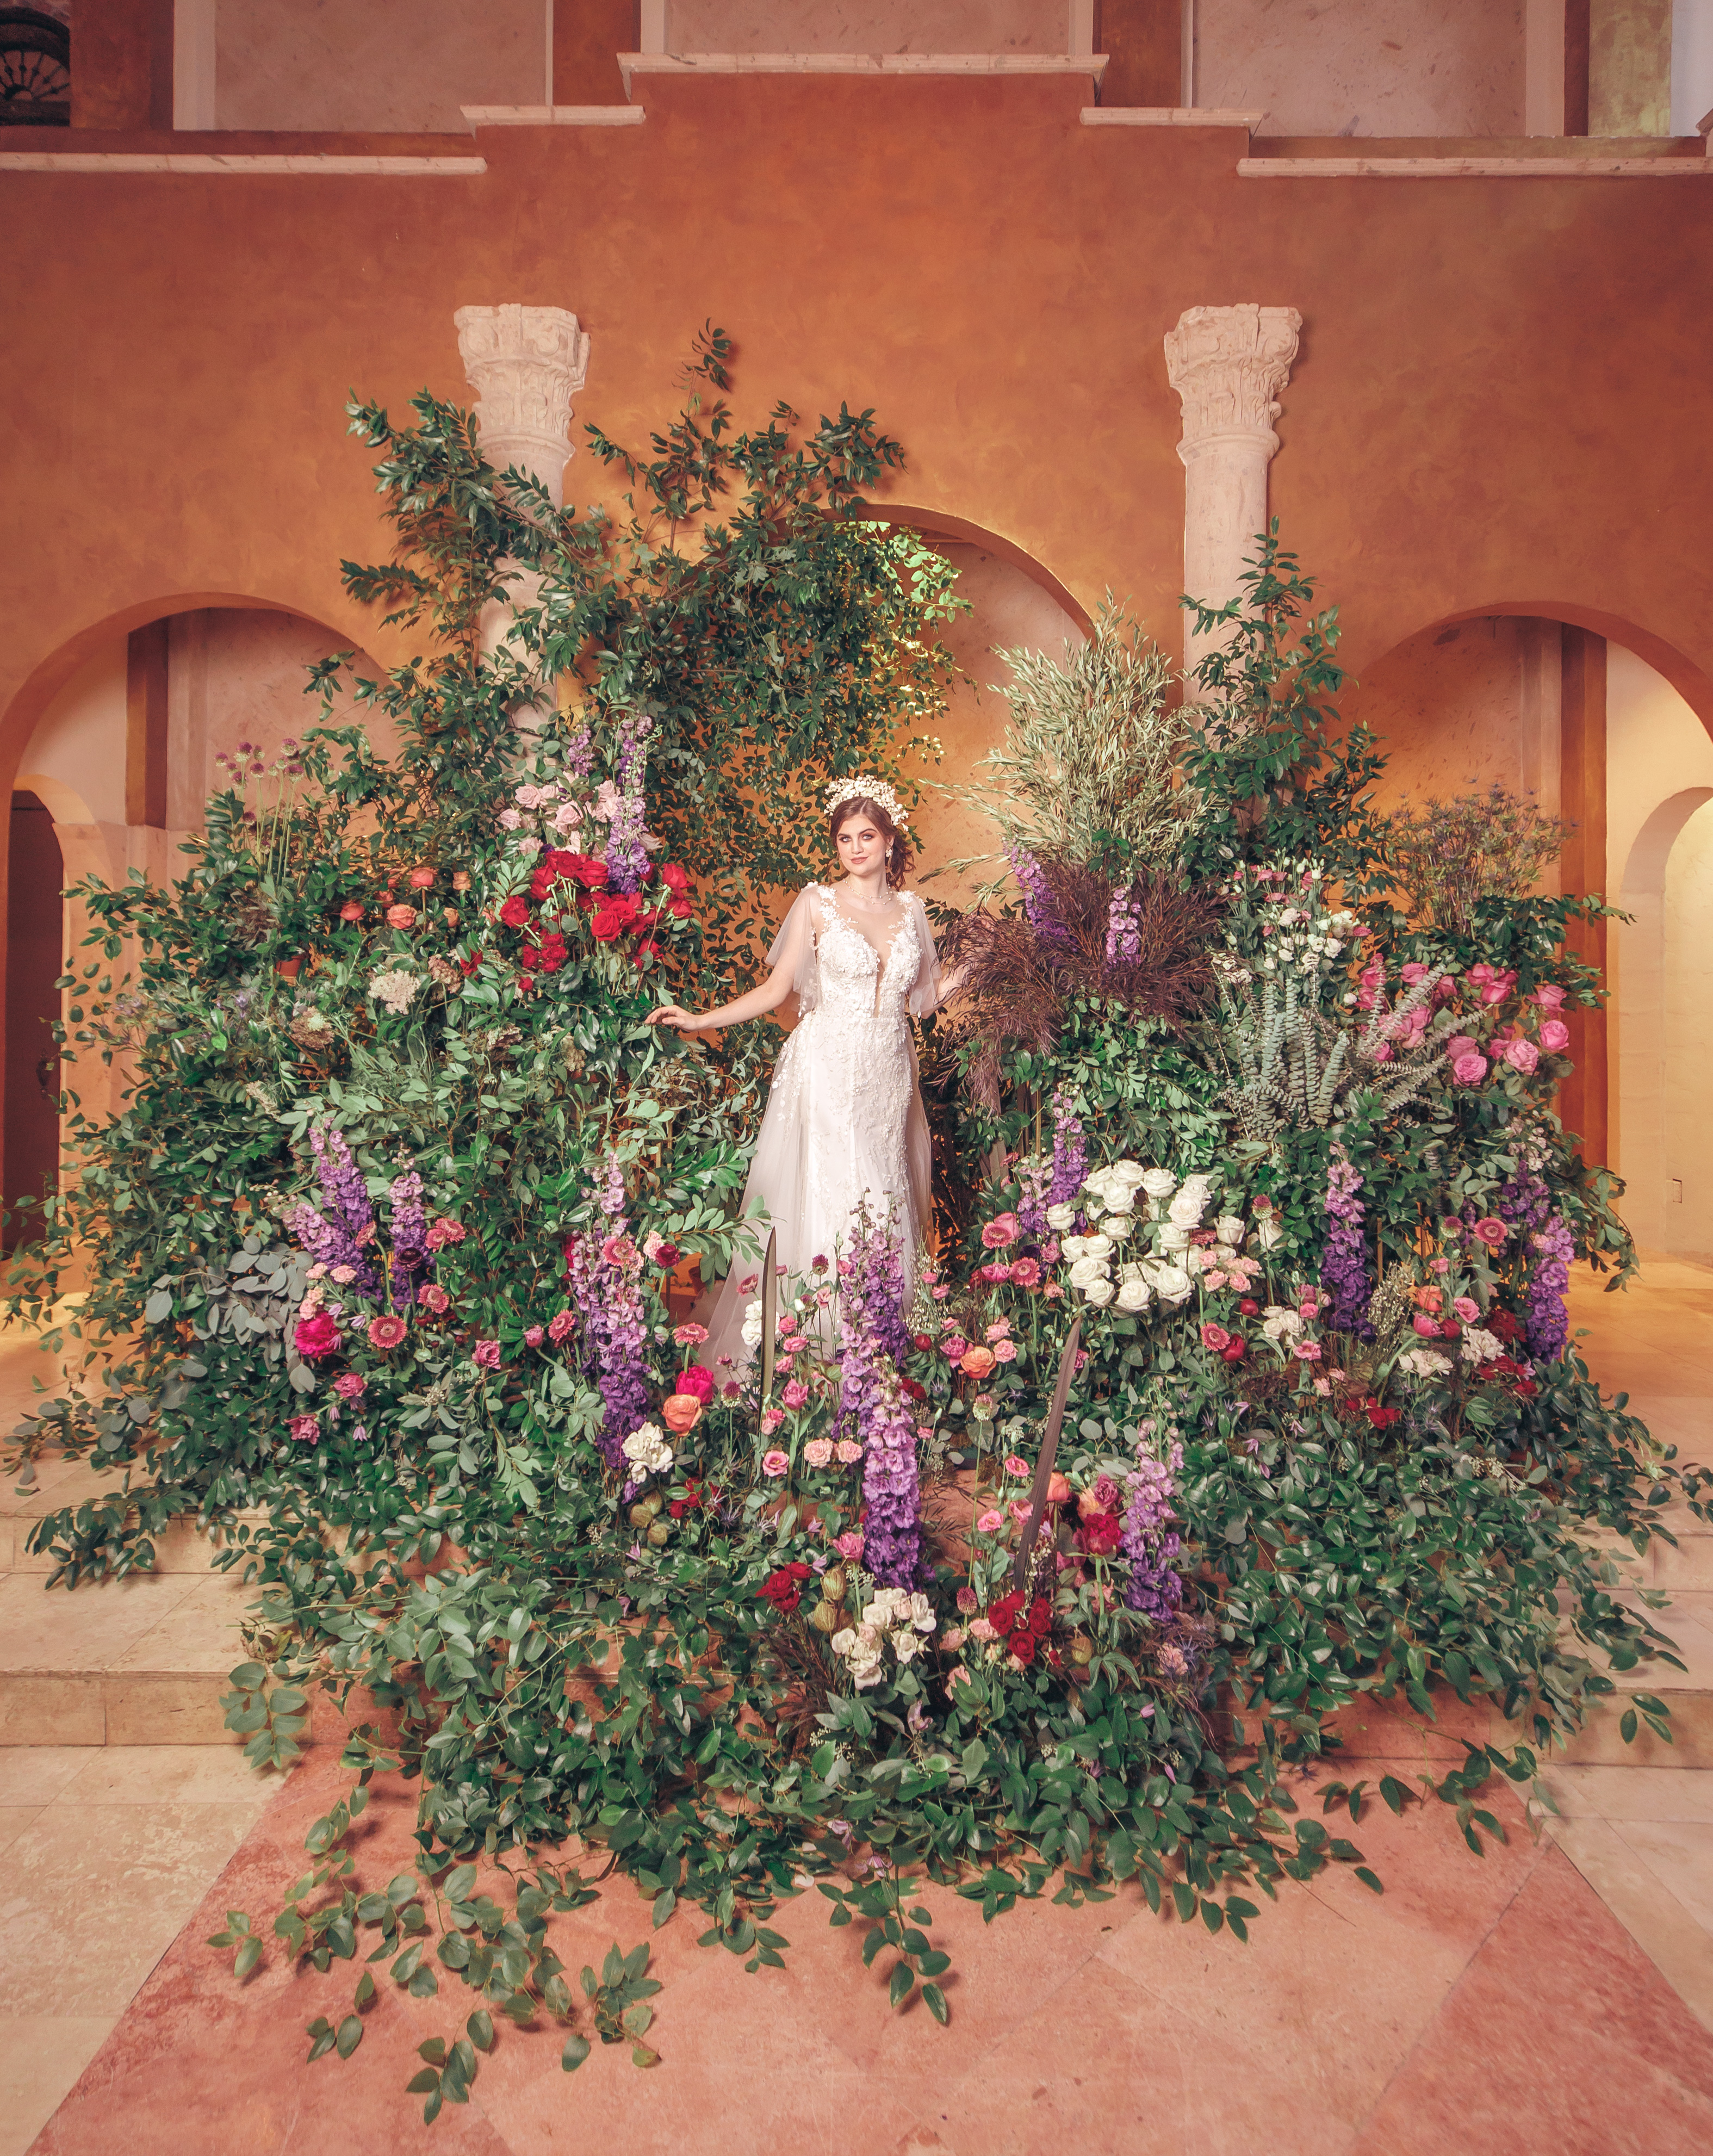 A bride stands in the middle of greenery and colorful flowers in the chapel at The Bell Tower on 34th.